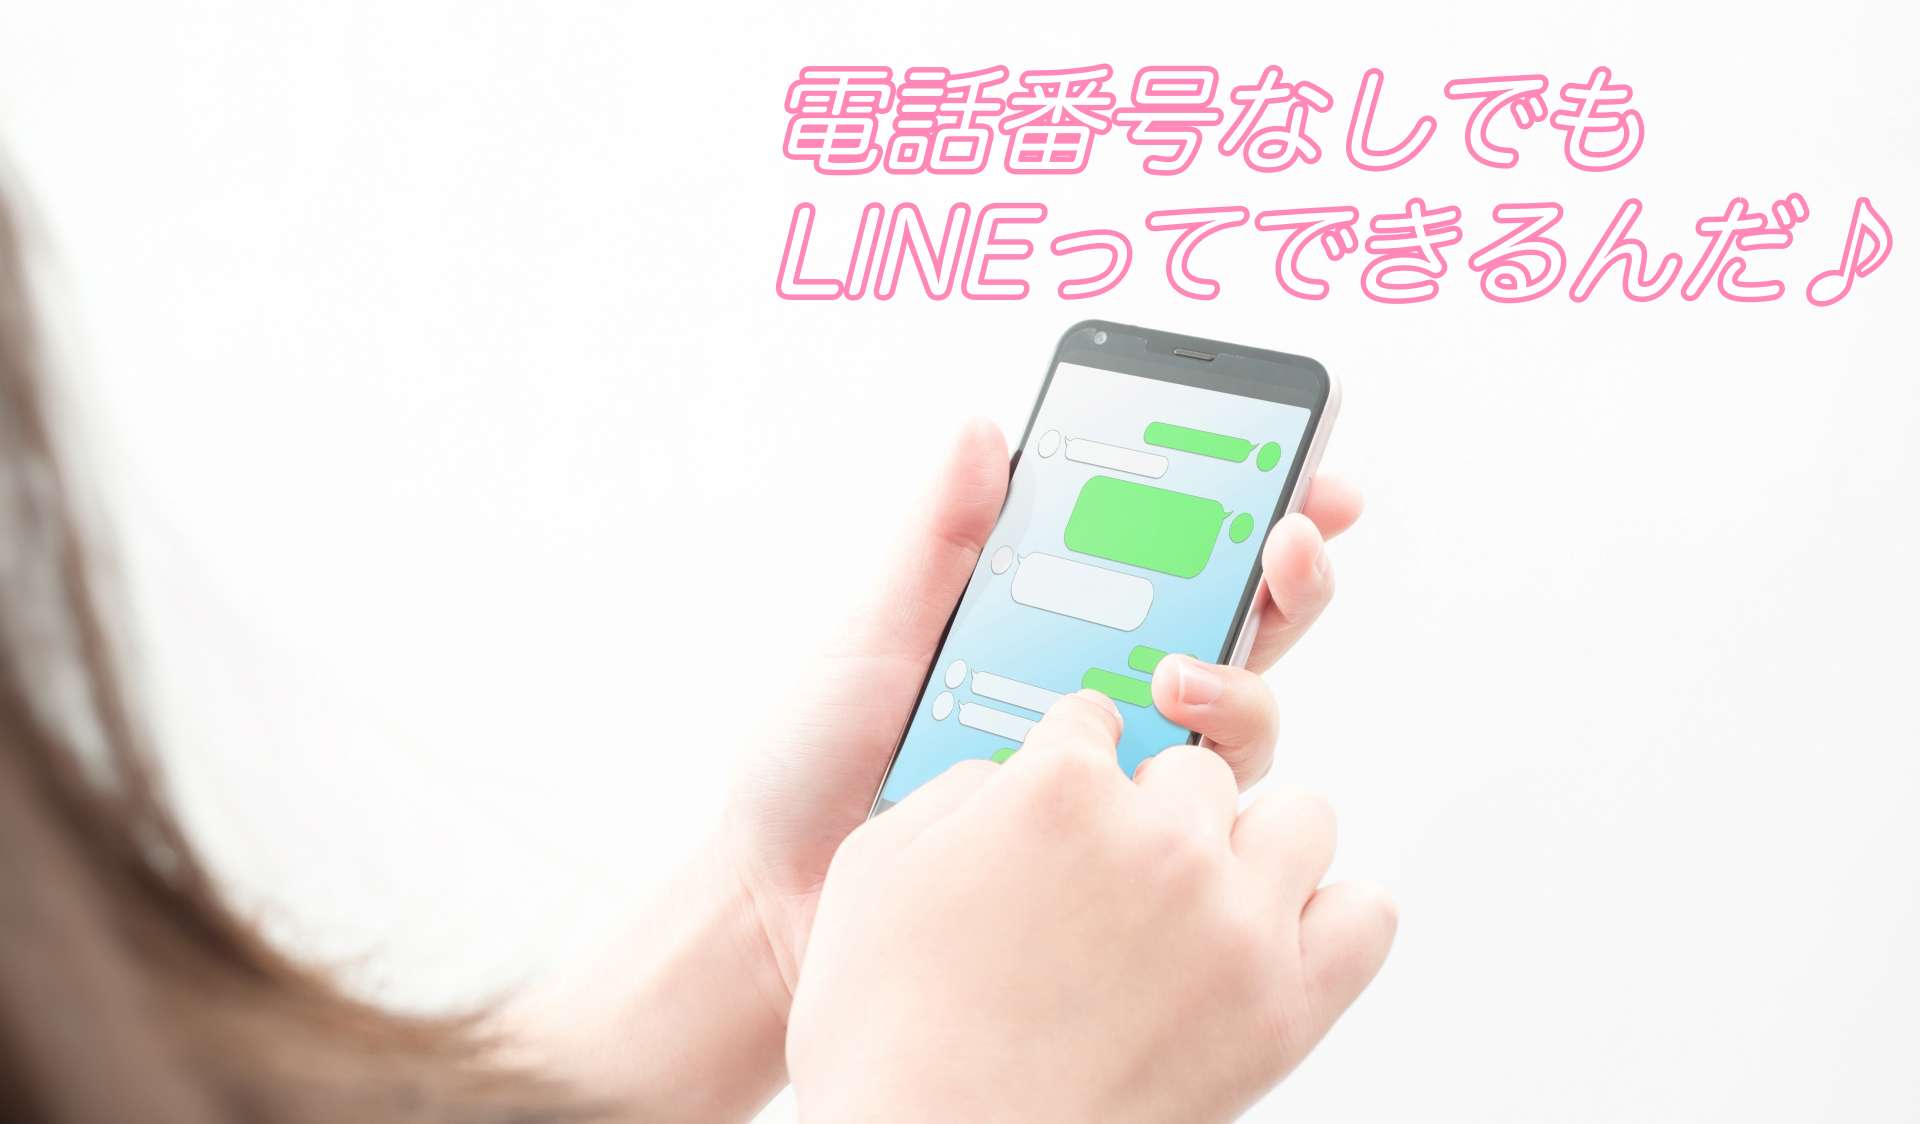 LINEをFacebookで新規登録して電話番号なしで登録